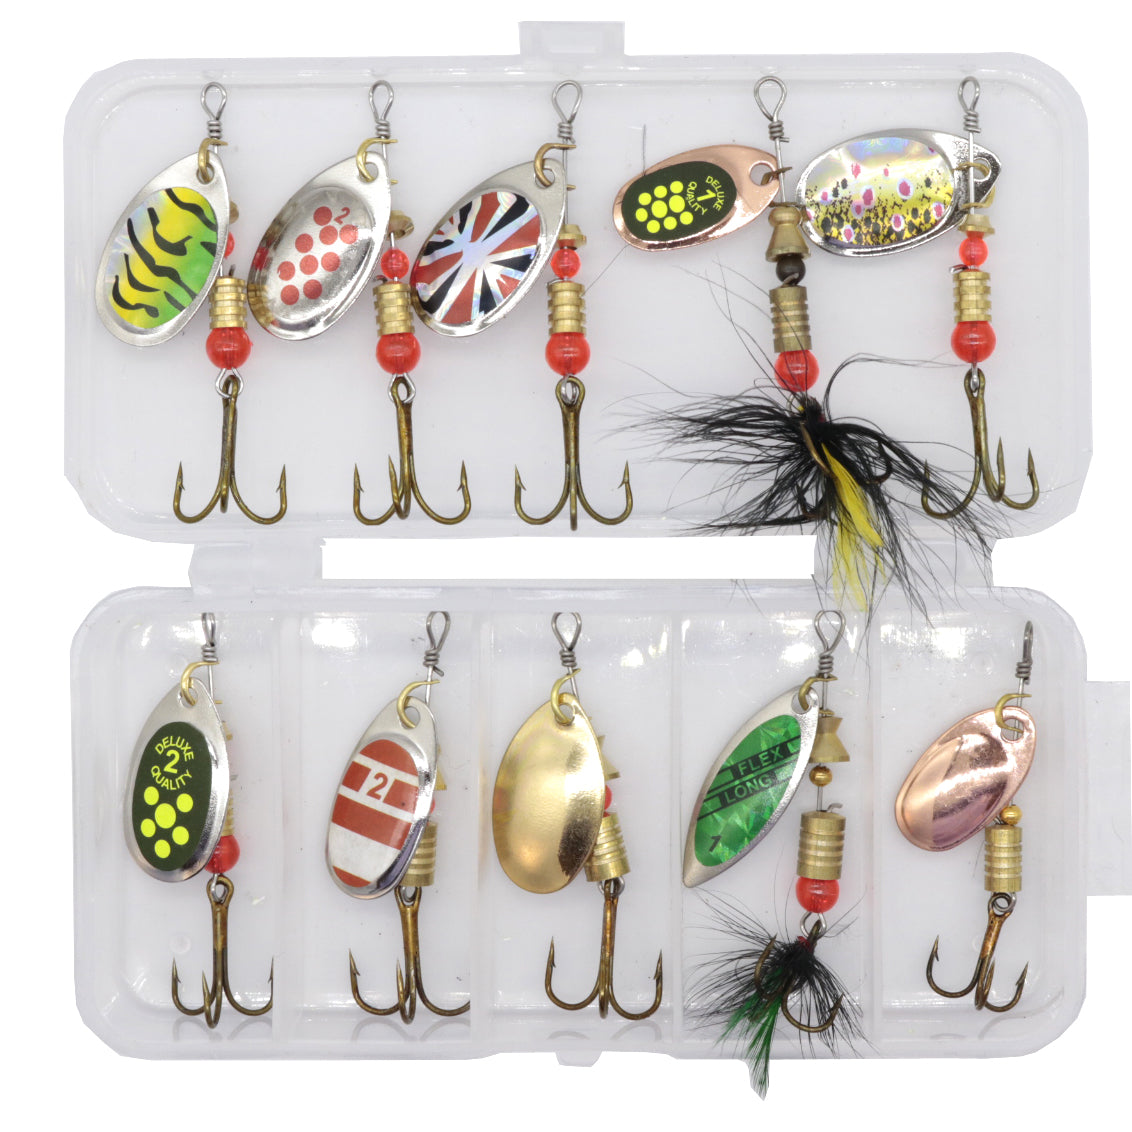 Trophy Trout Lures and Fly Fishing - the best trout lures and flies.